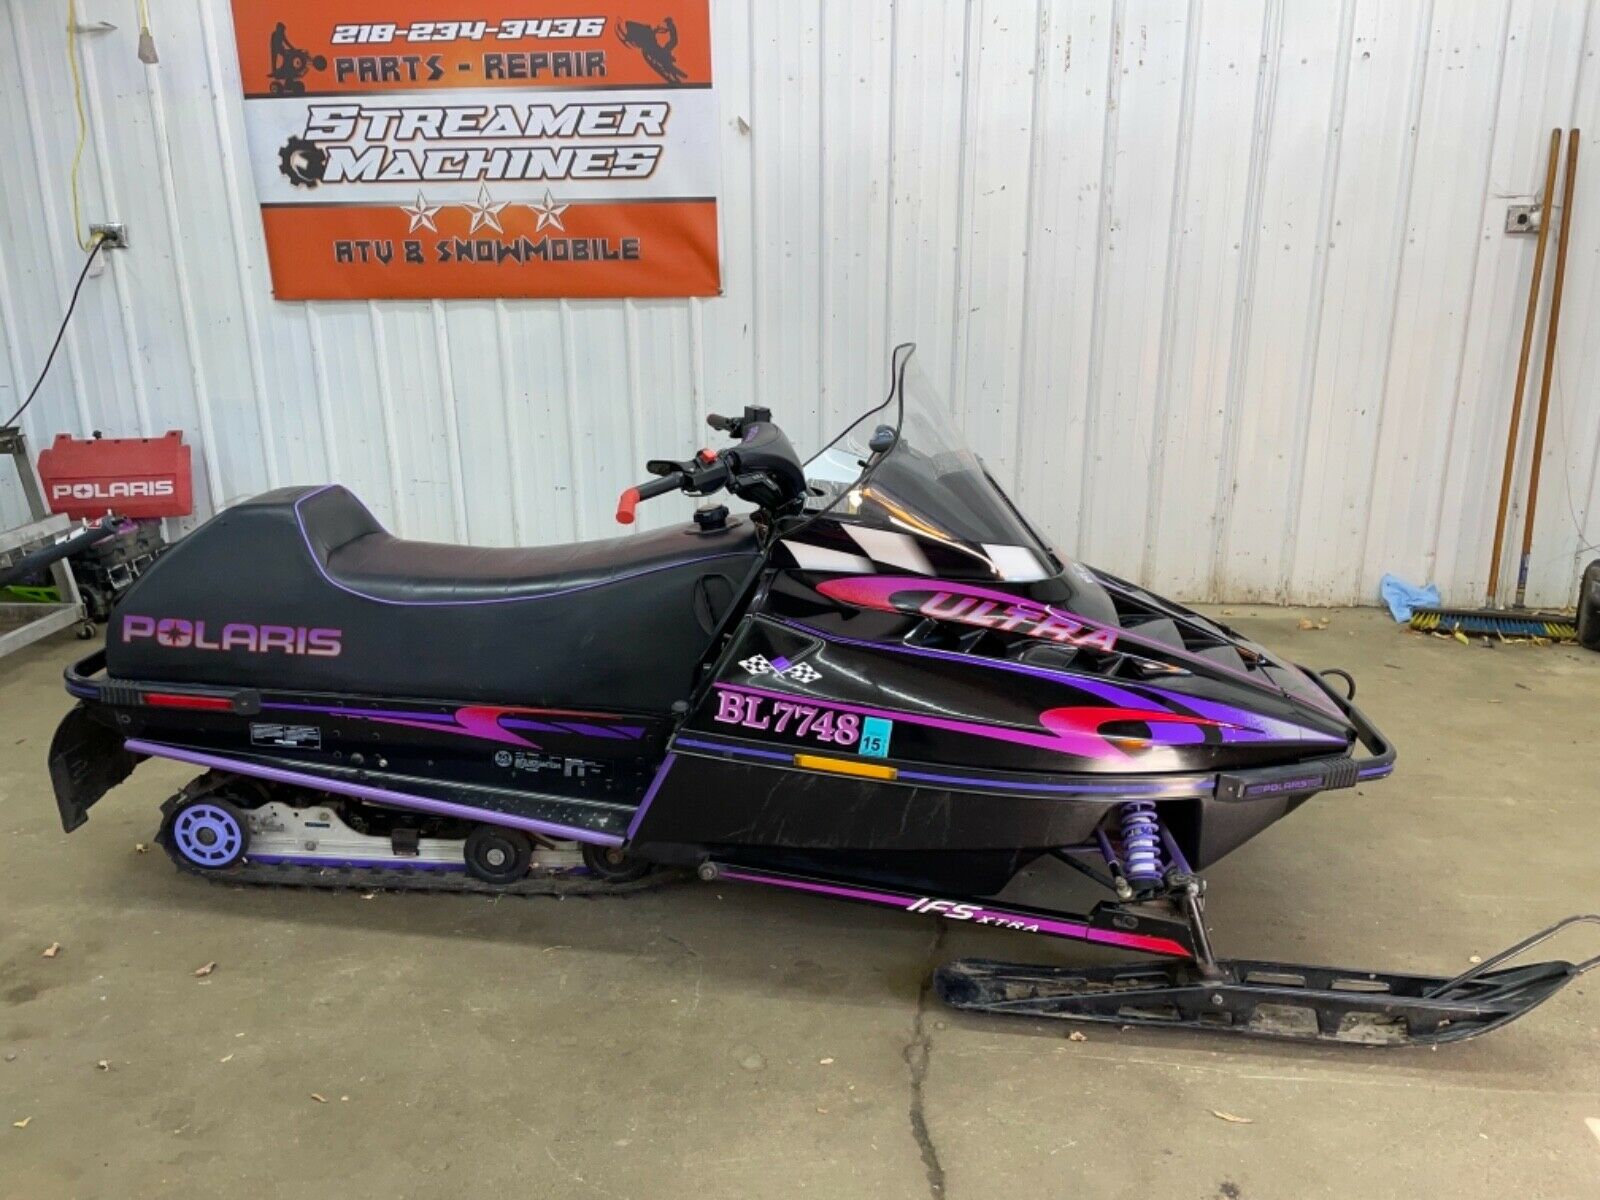 1996 96 Polaris Indy Ultra 680 Triple Pipes Reverse Low Miles Clean